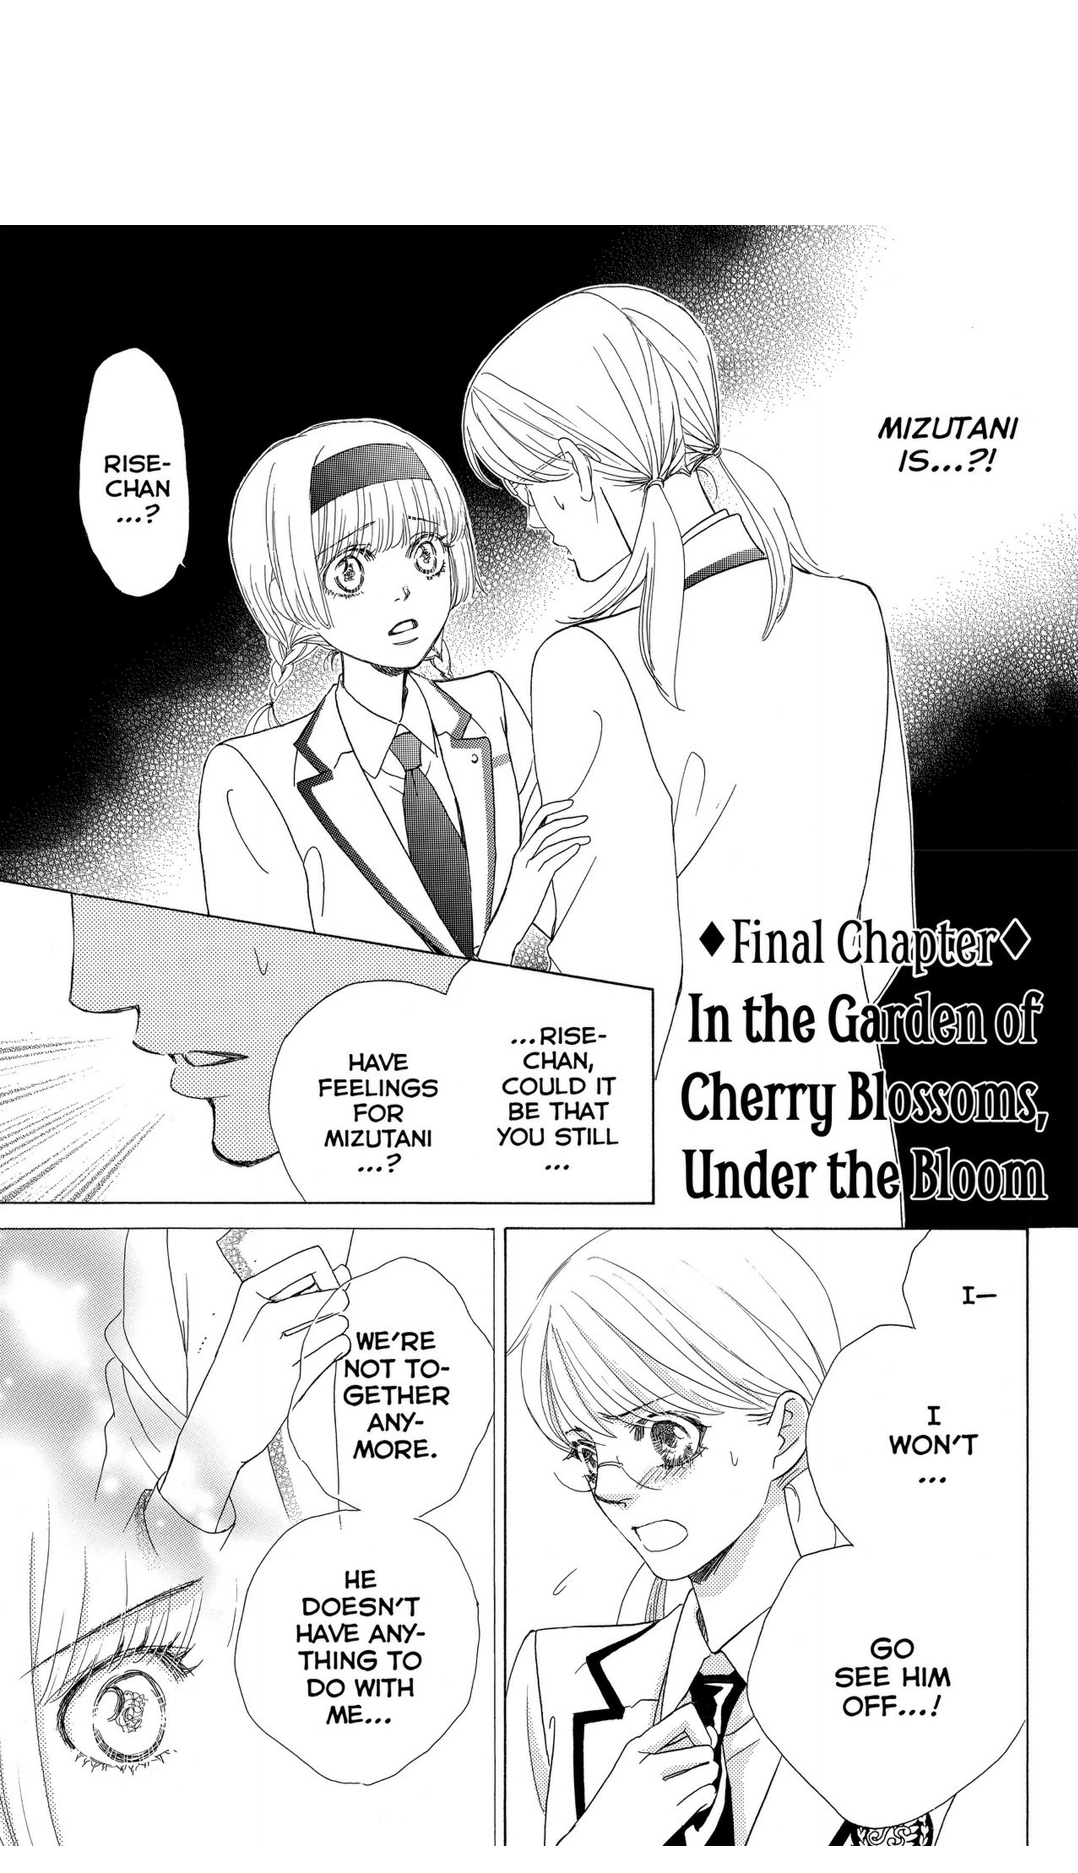 Gakuen Ouji Chapter 48 - Final Chapter: In The Garden Of Cherry Blossoms, Under The Bloom - Picture 1